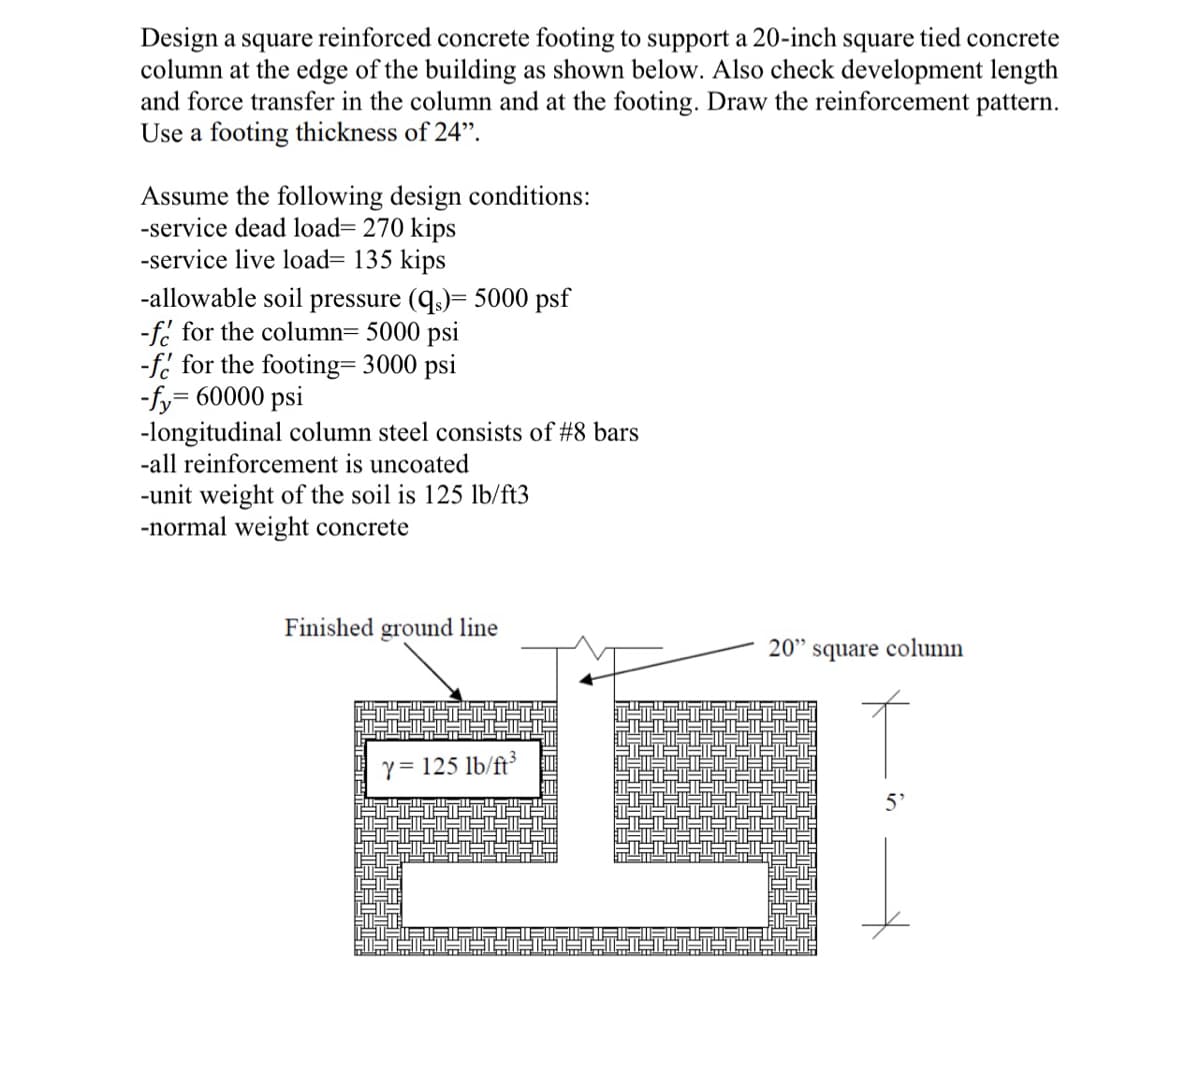 Design a square reinforced concrete footing to support a 20-inch square tied concrete
column at the edge of the building as shown below. Also check development length
and force transfer in the column and at the footing. Draw the reinforcement pattern.
Use a footing thickness of 24".
Assume the following design conditions:
-service dead load= 270 kips
-service live load= 135 kips
-allowable soil pressure (q)= 5000 psf
-f. for the column= 5000 psi
-f. for the footing= 3000 psi
-fy= 60000 psi
-longitudinal column steel consists of #8 bars
reinf
cement is uncoated
-unit weight of the soil is 125 lb/ft3
-normal weight concrete
Finished ground line
20" square column
Y = 125 lb/ft³
5'
